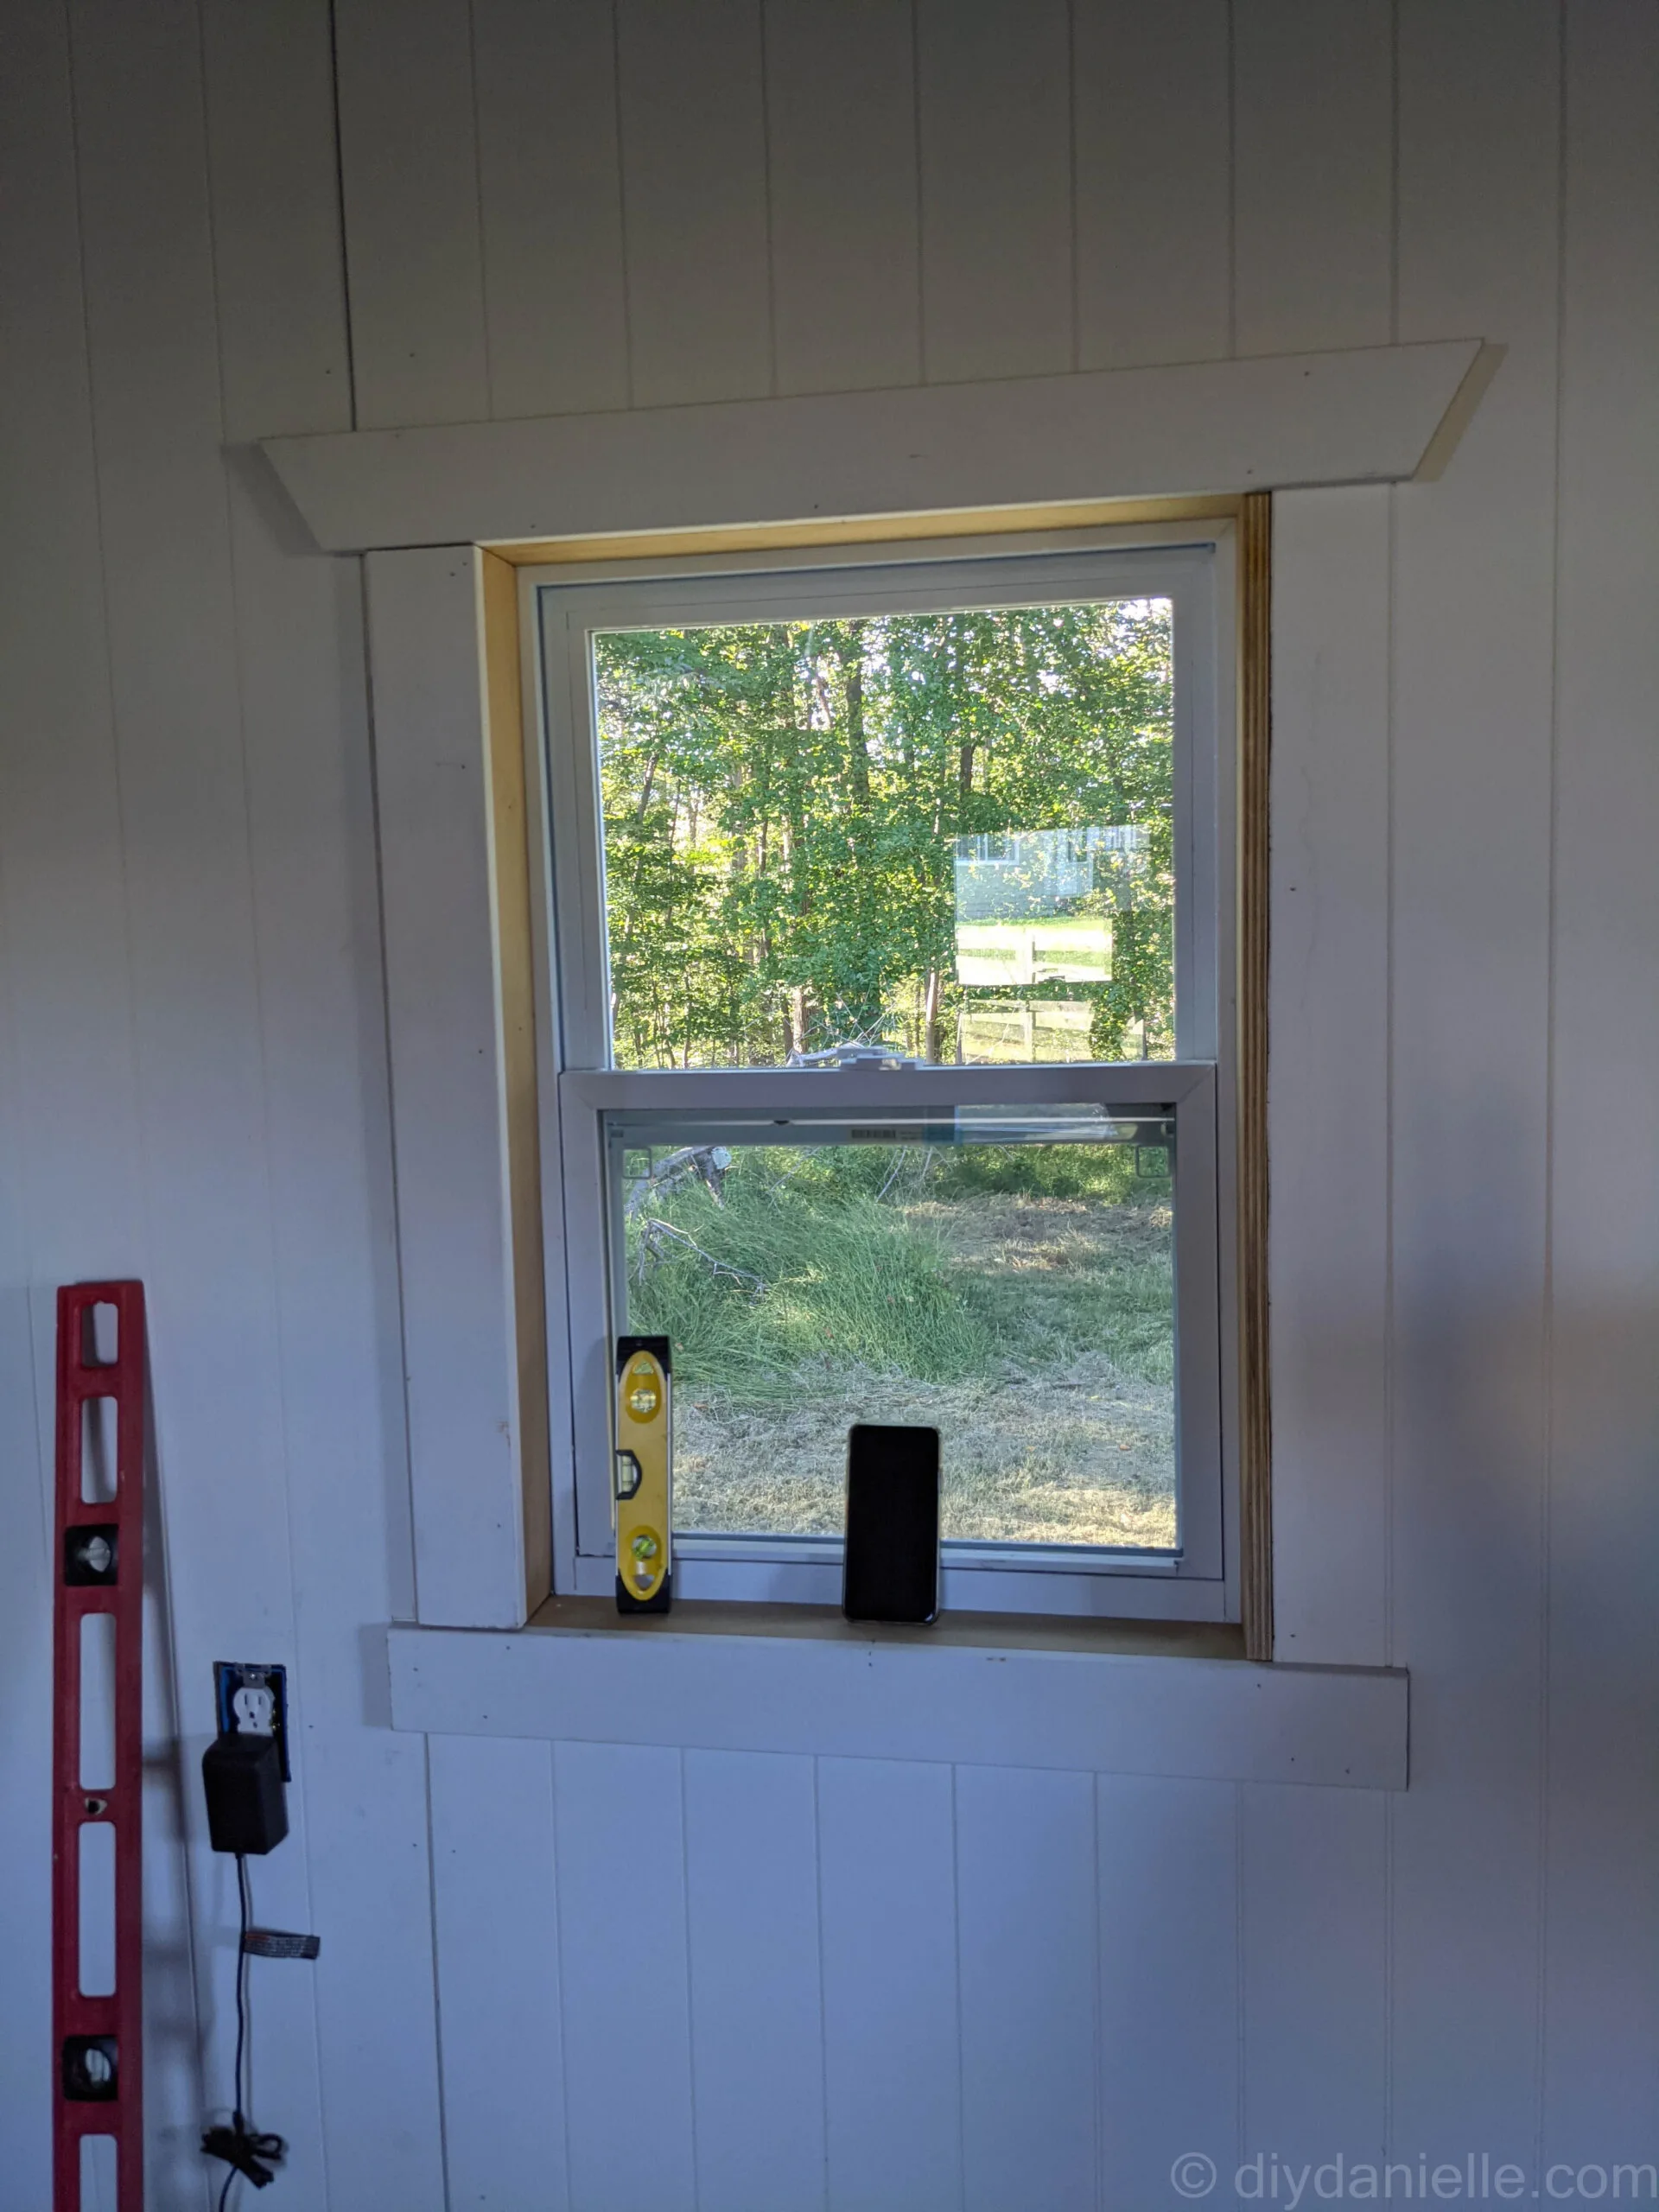 As you can see above, the left side casing has been attached, but the right side casing has not. As a result, you can see the raw edge of the piece of plywood we used to build the window jams.